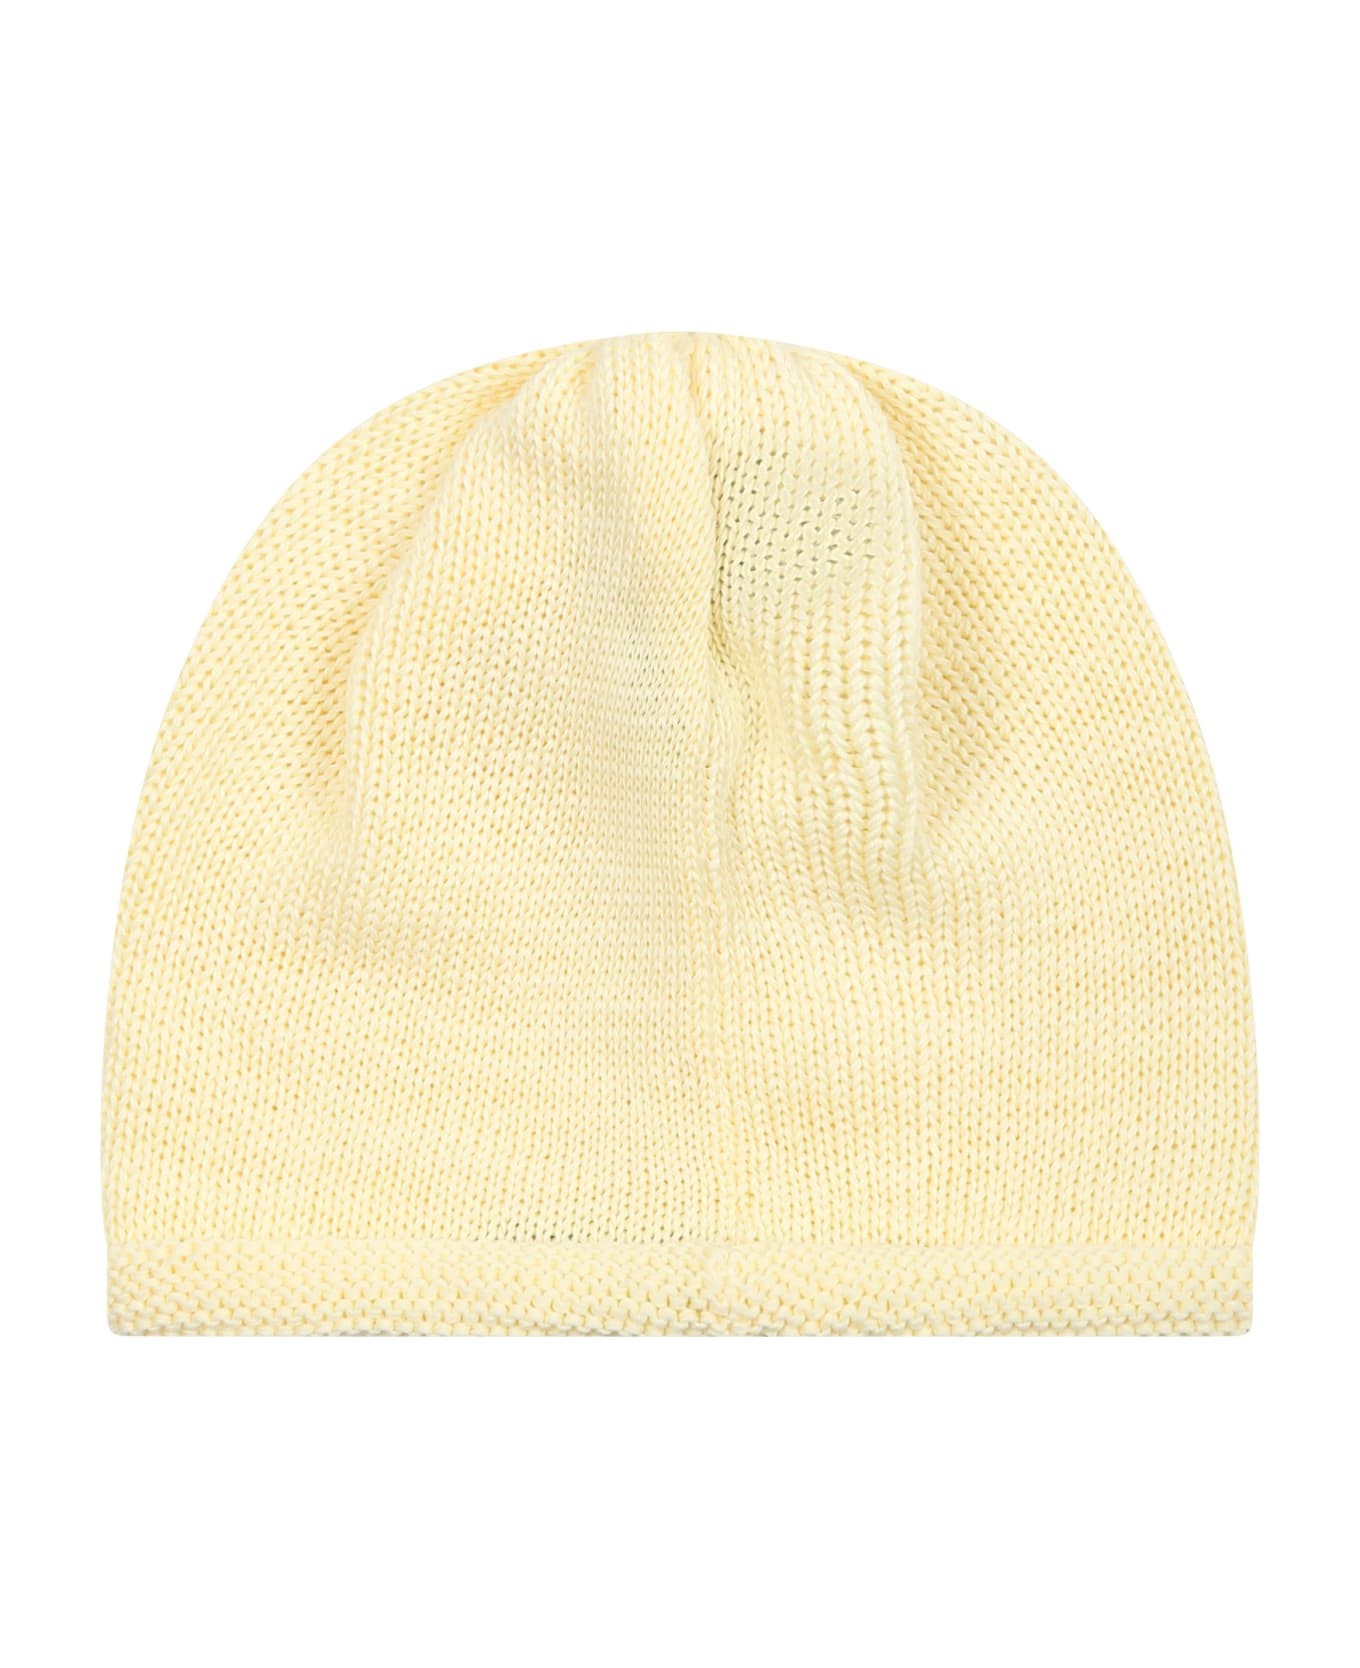 Little Bear Yellow Hat Hats For Baby Kids - Yellow